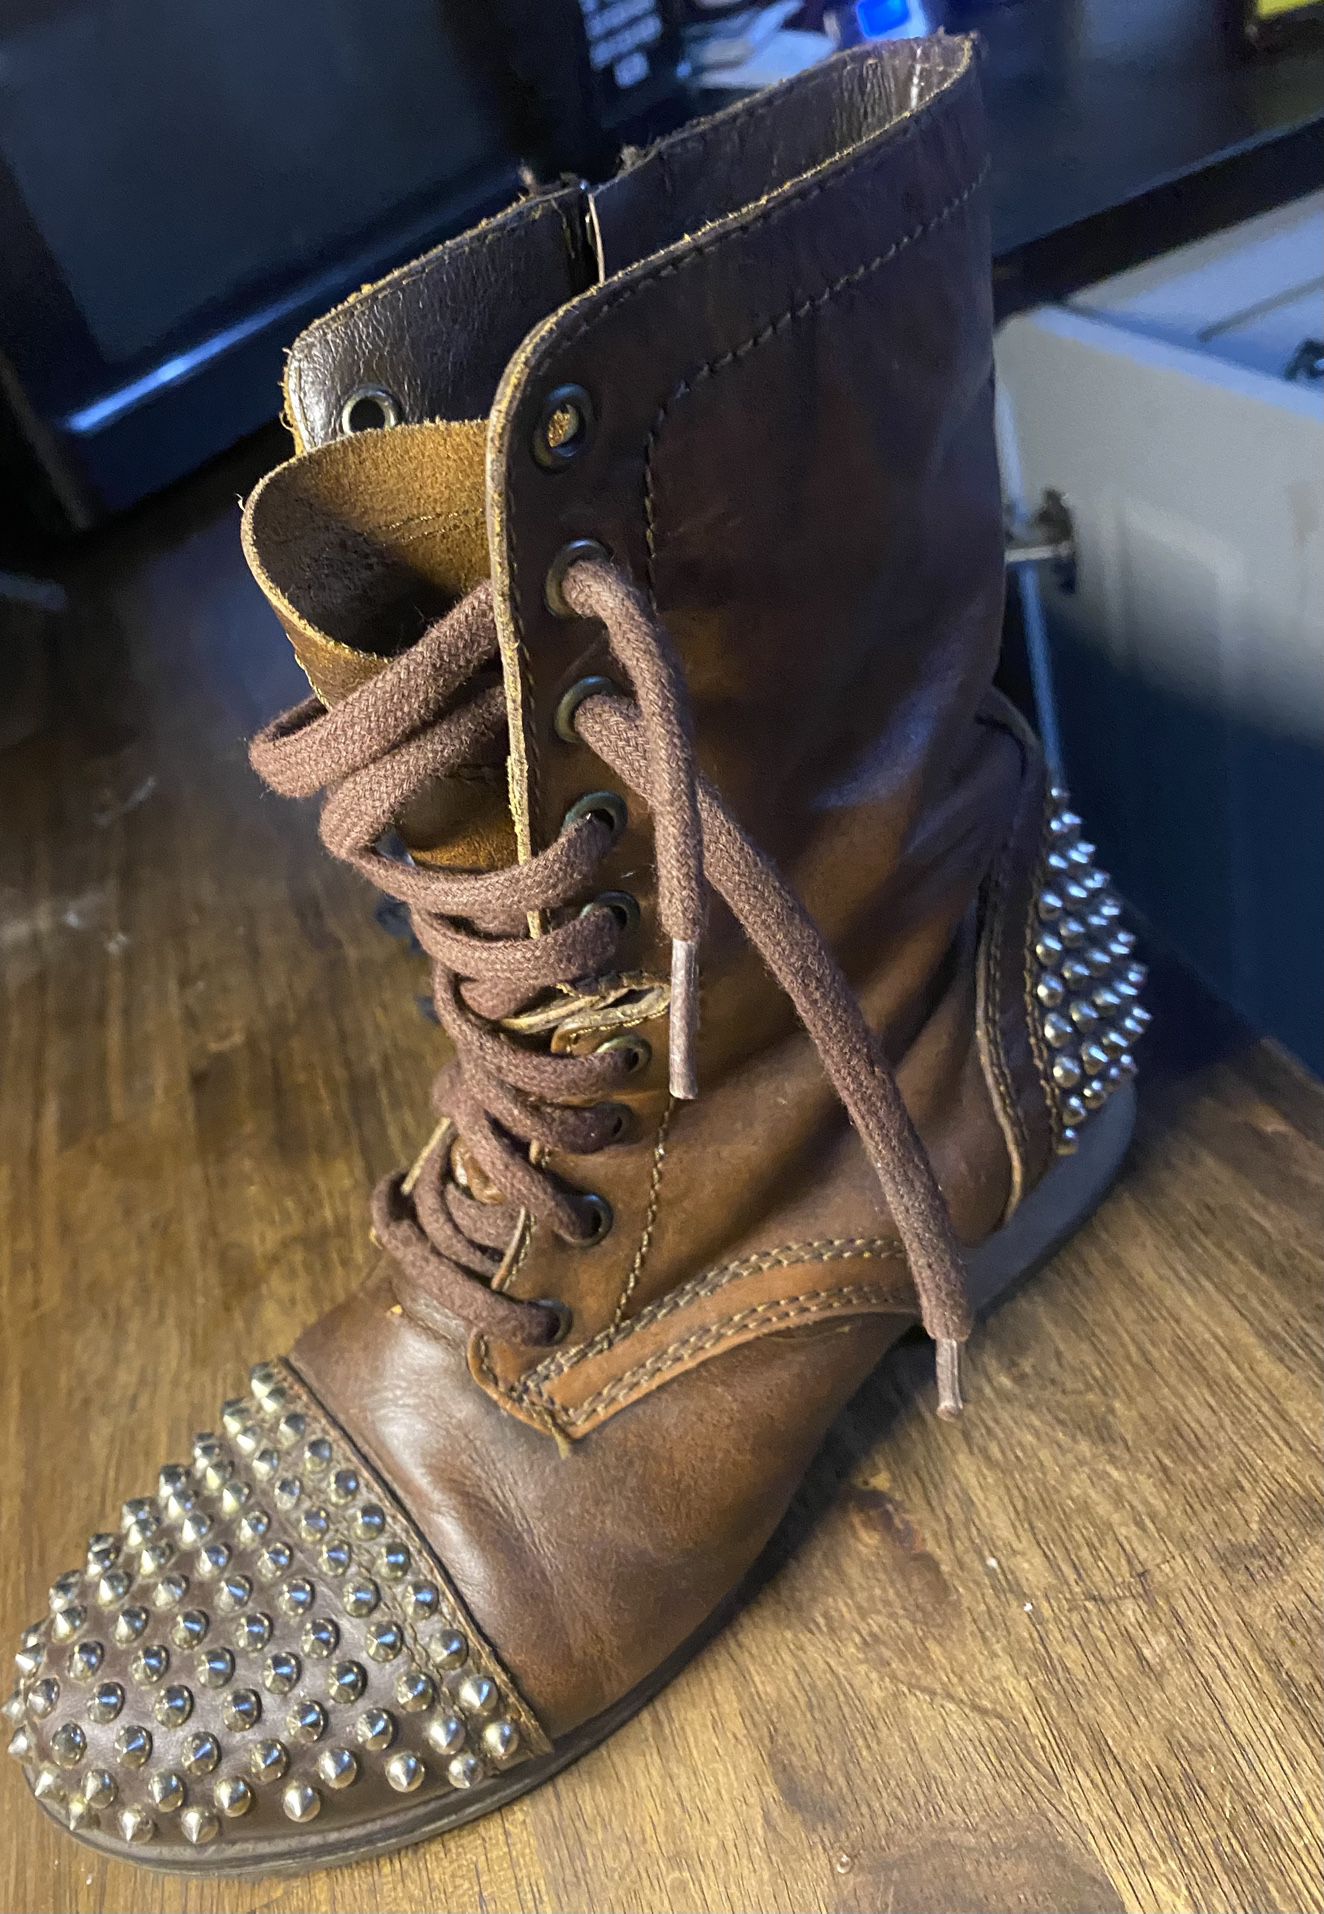 Steve Madden Studded Combat Boots for Sale in San Antonio, - OfferUp